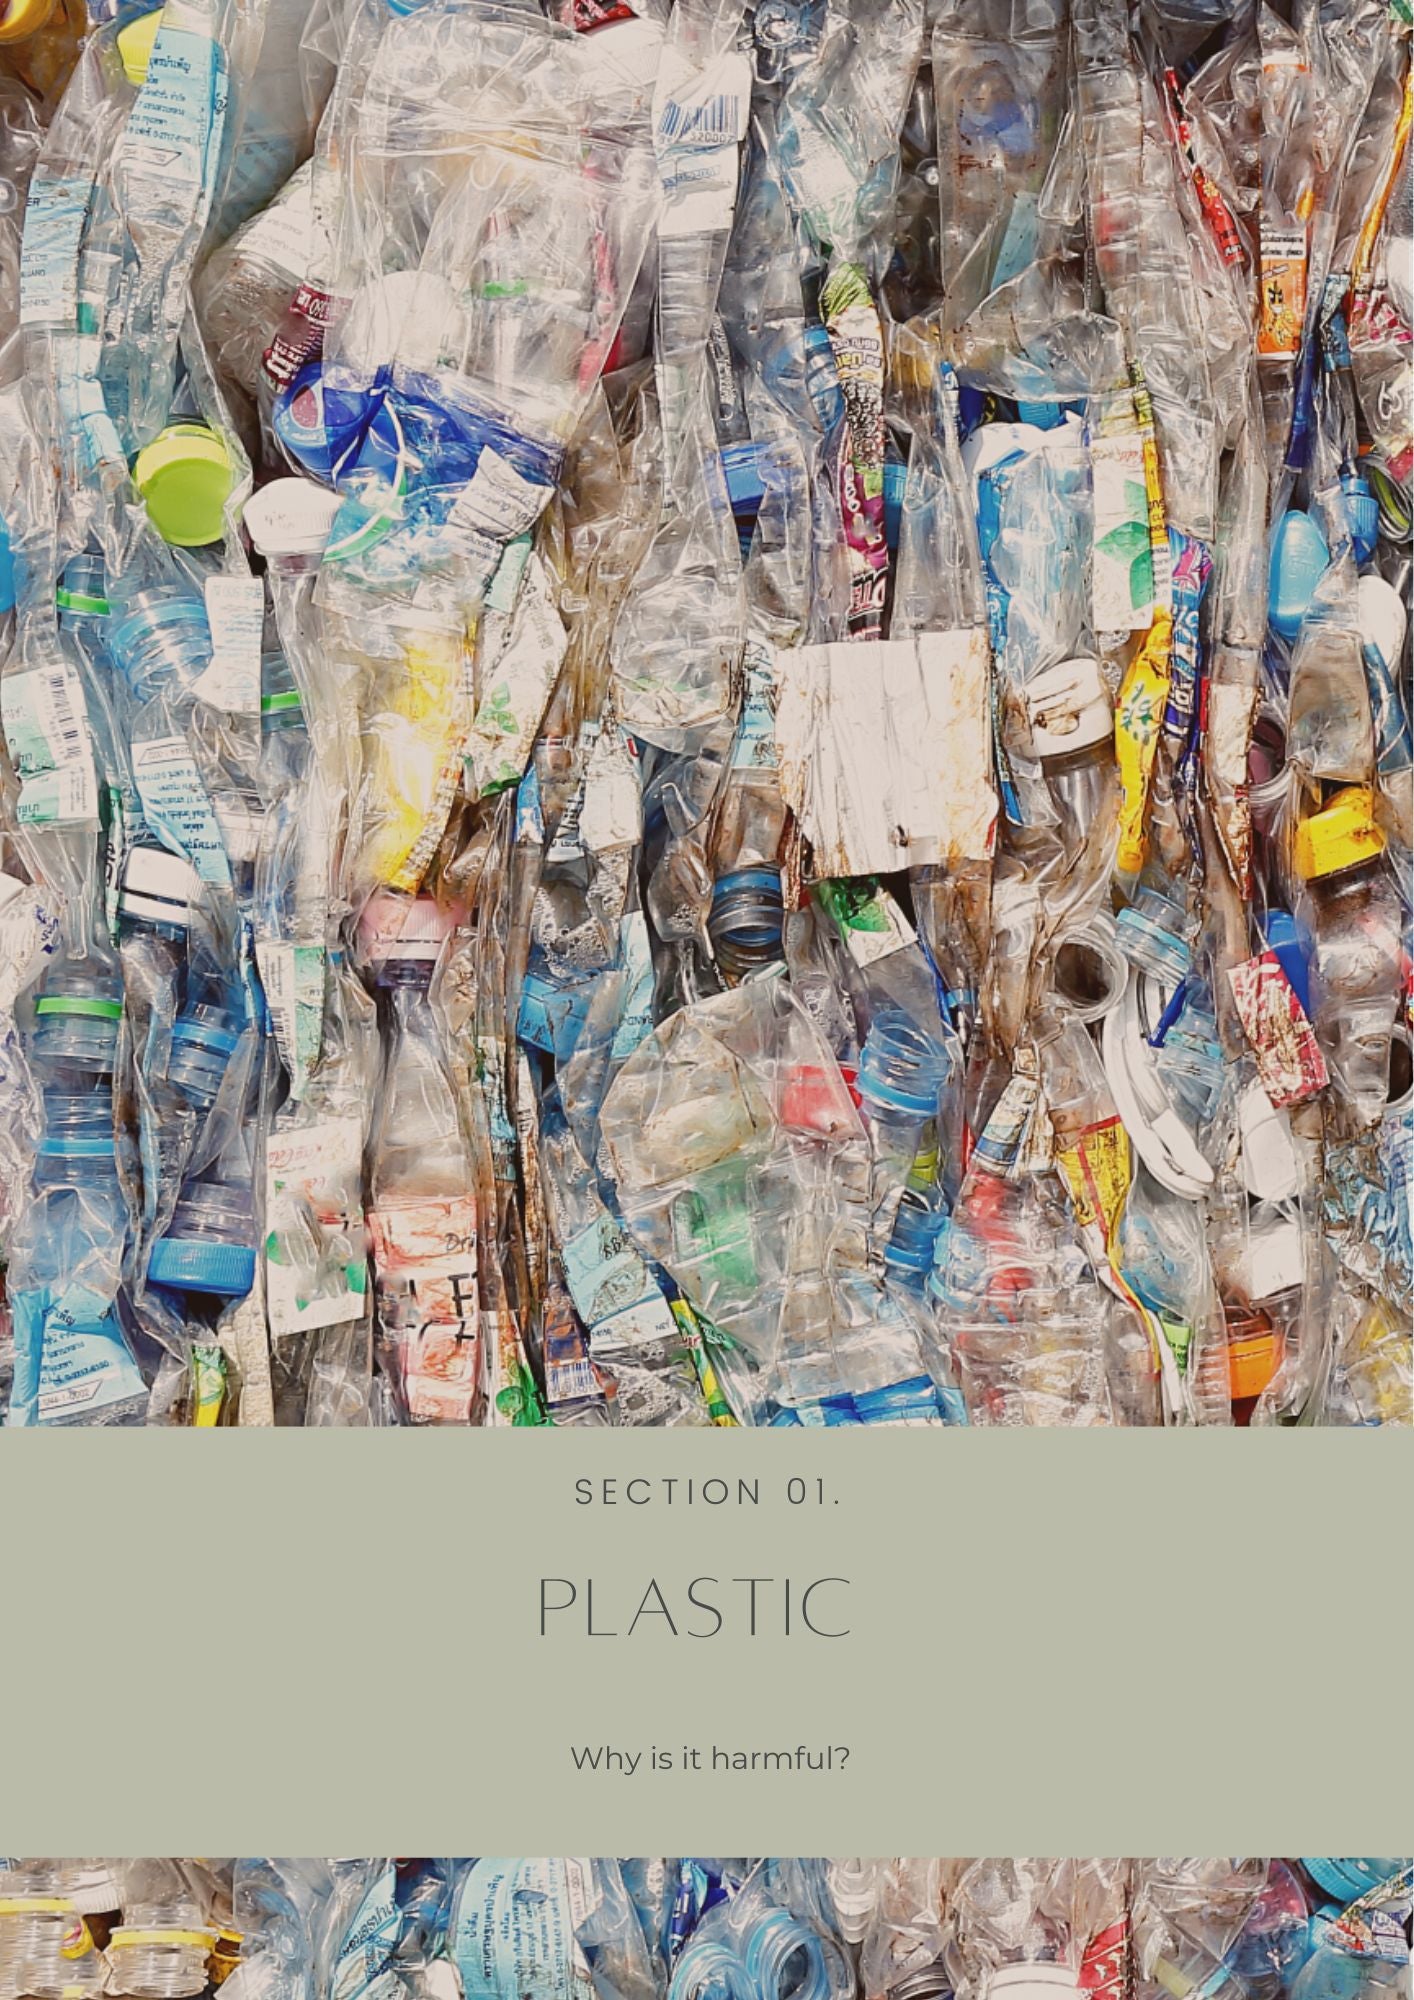 Plastic pollution - an introduction